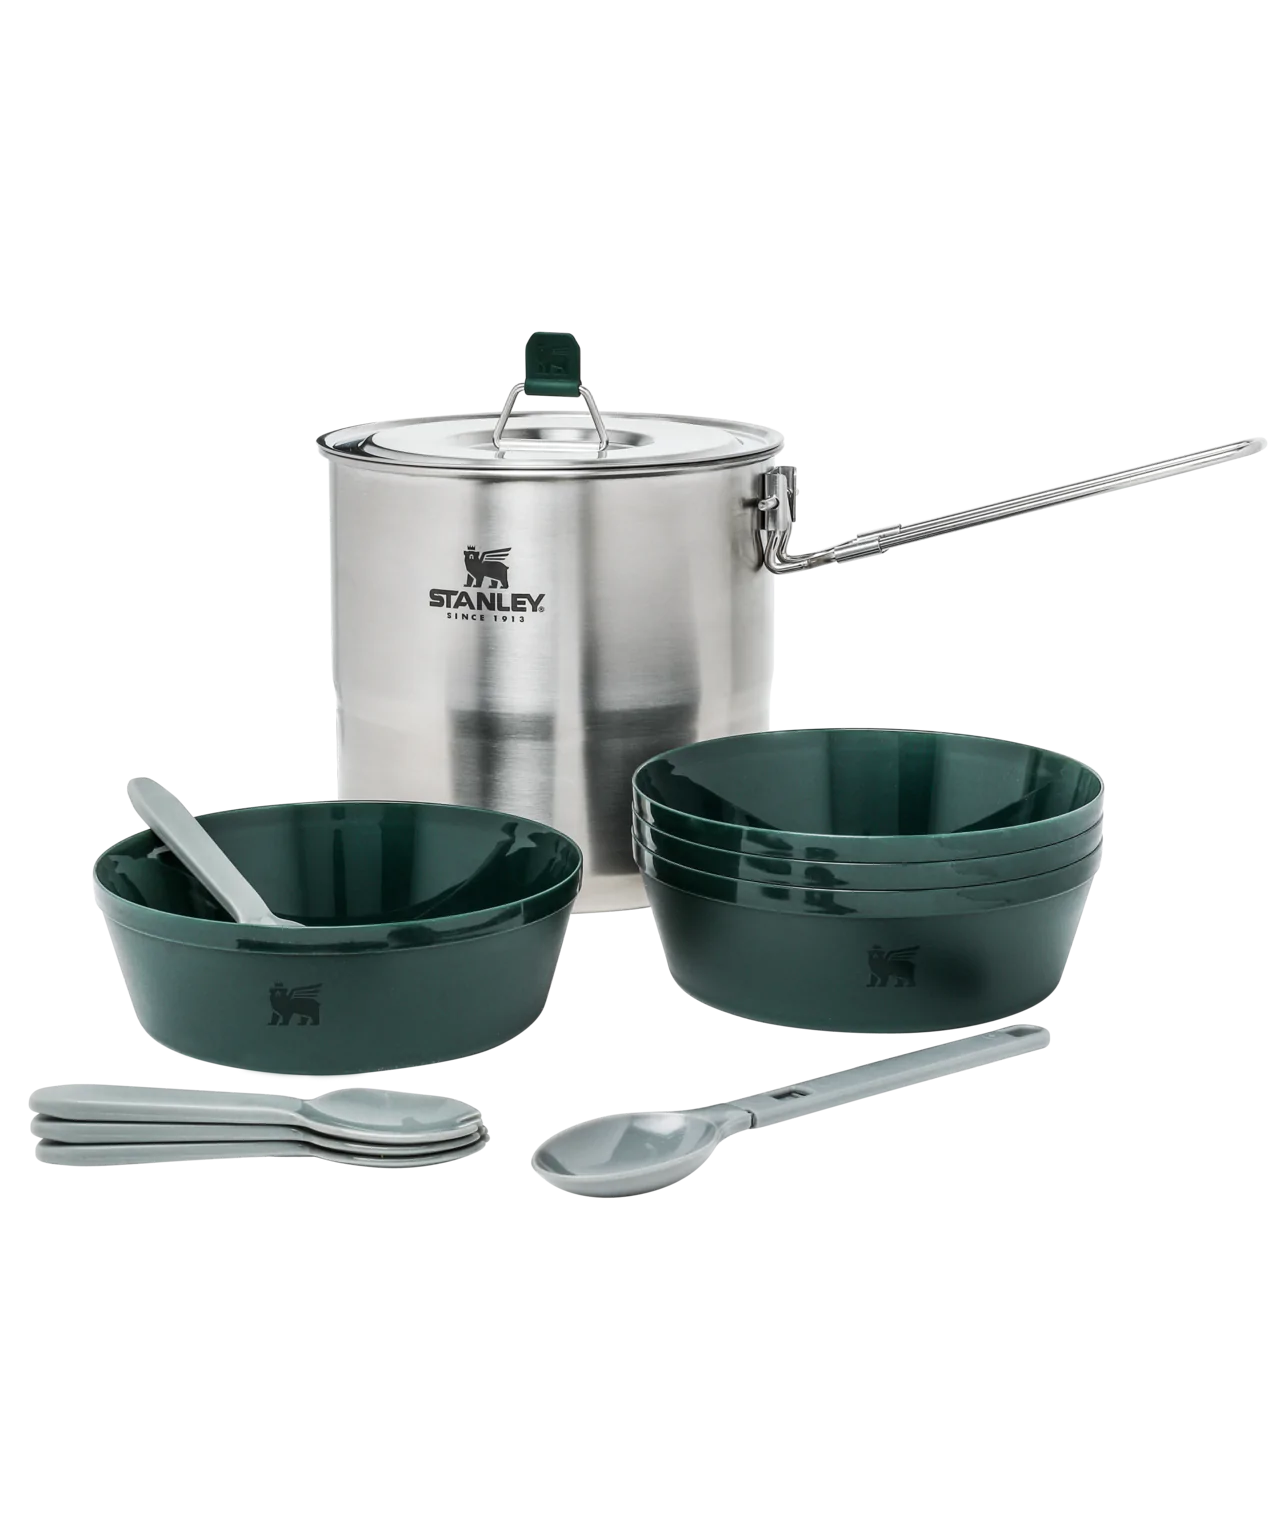 Stanley The Stainless Steel Cook Set for Four